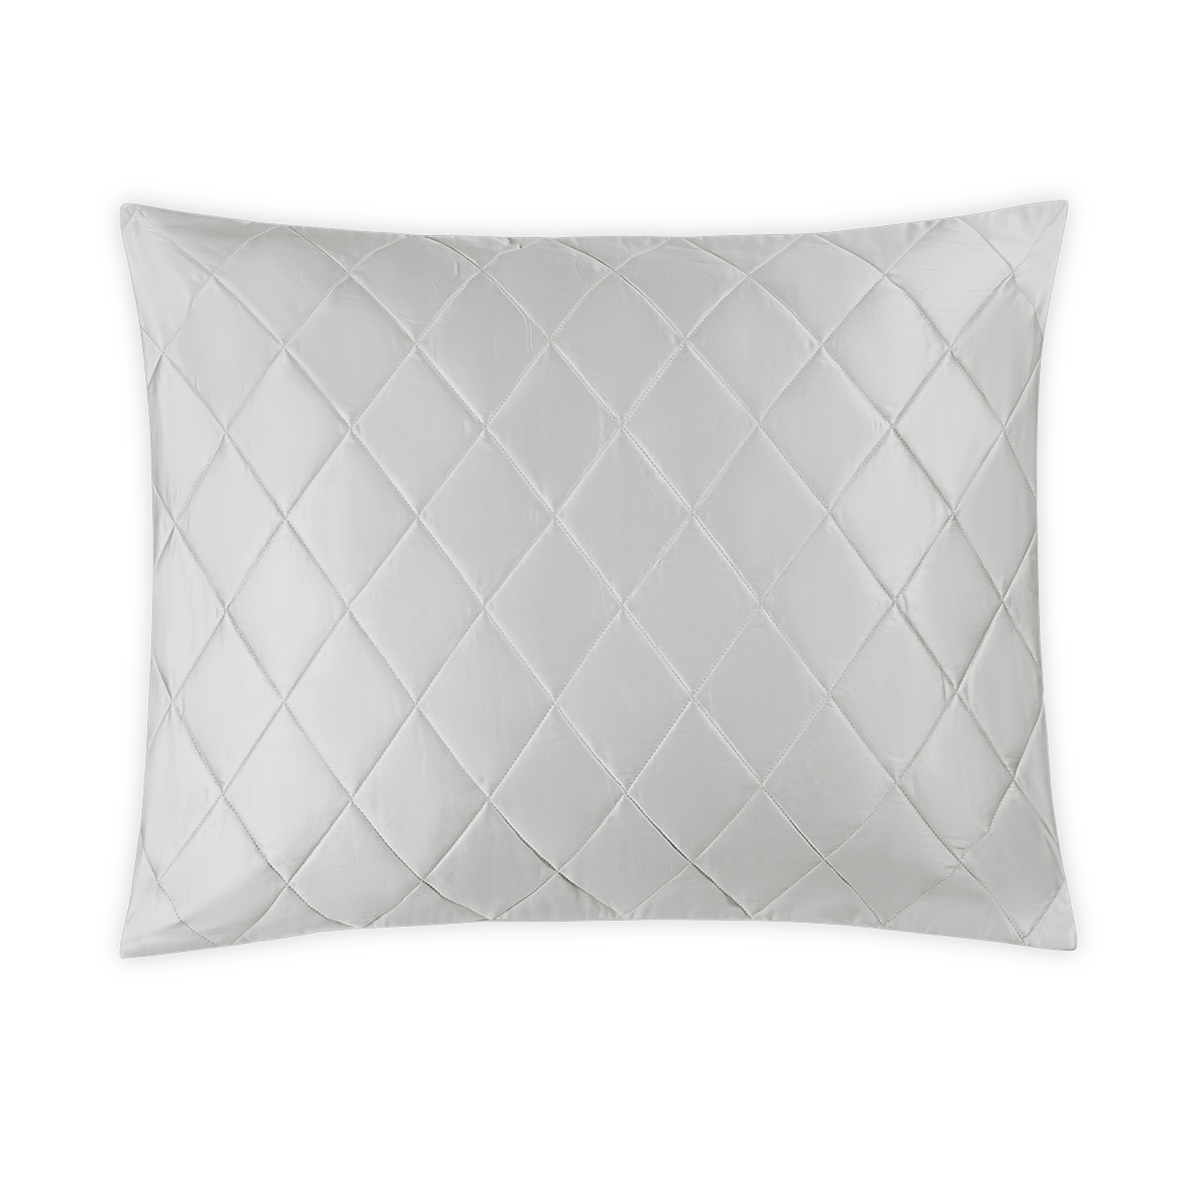 Silo Image of Matouk Nocturne Quilted Bedding Sham in Silver